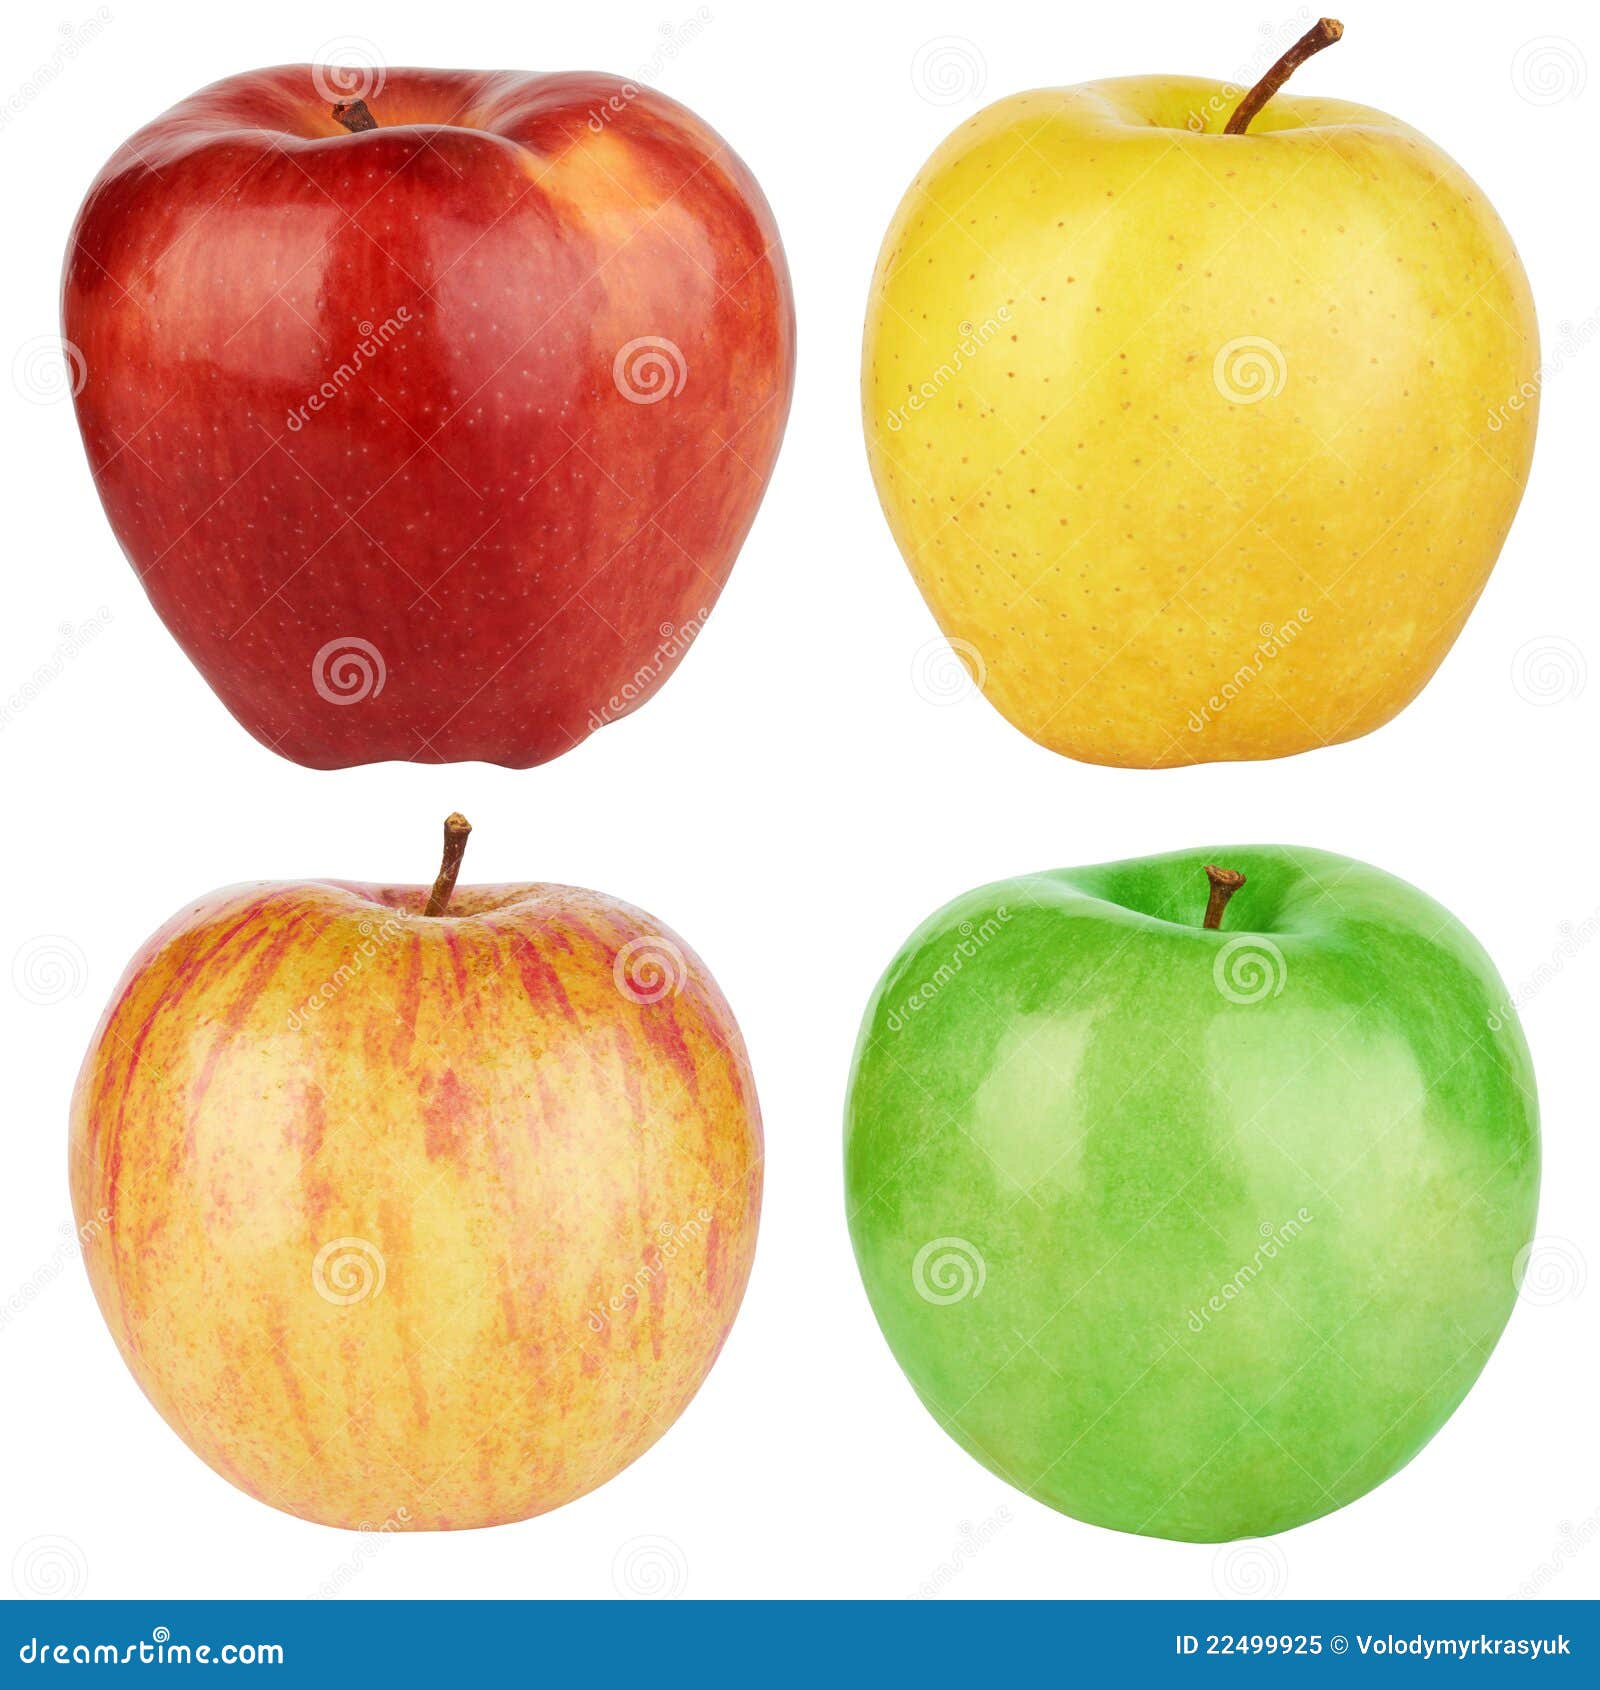 green apple color name